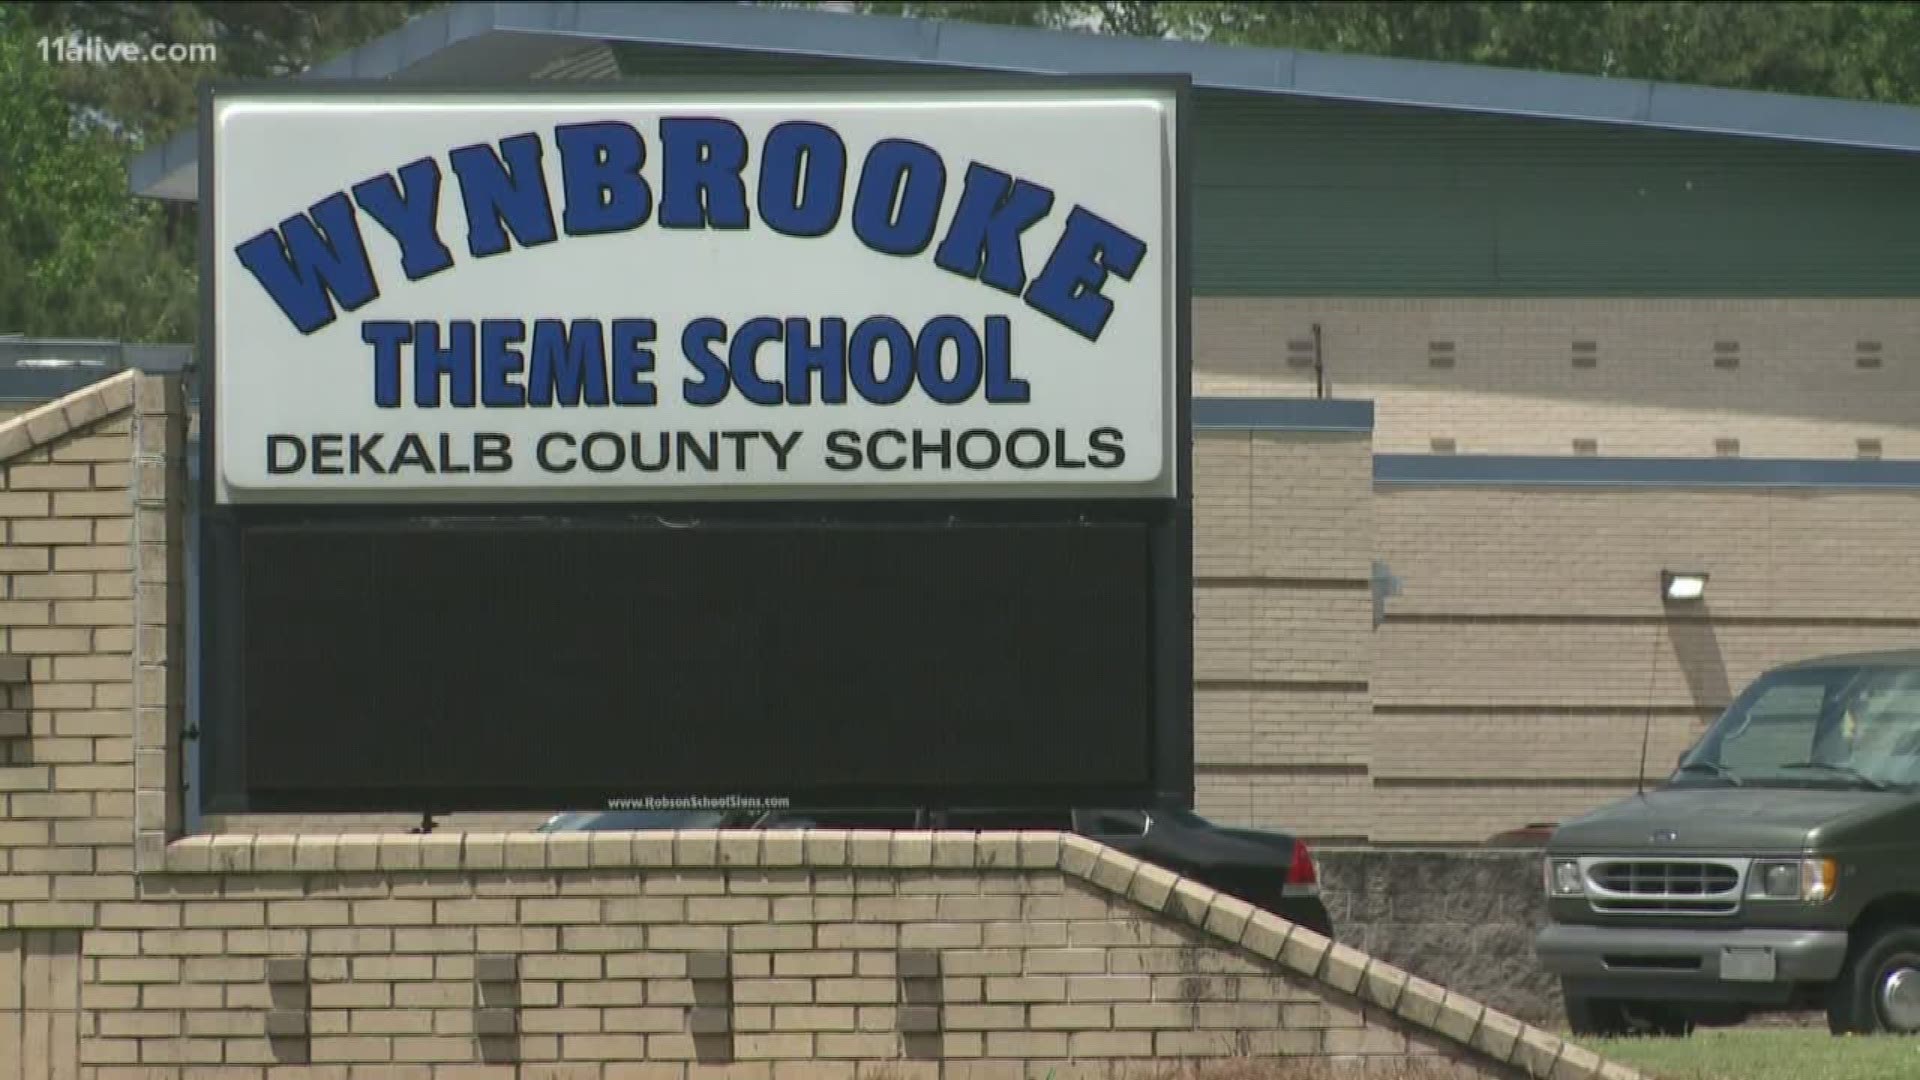 Ten children were hurt by the pellet gun while playing outside at Wynbrooke Elementary School on Thursday.